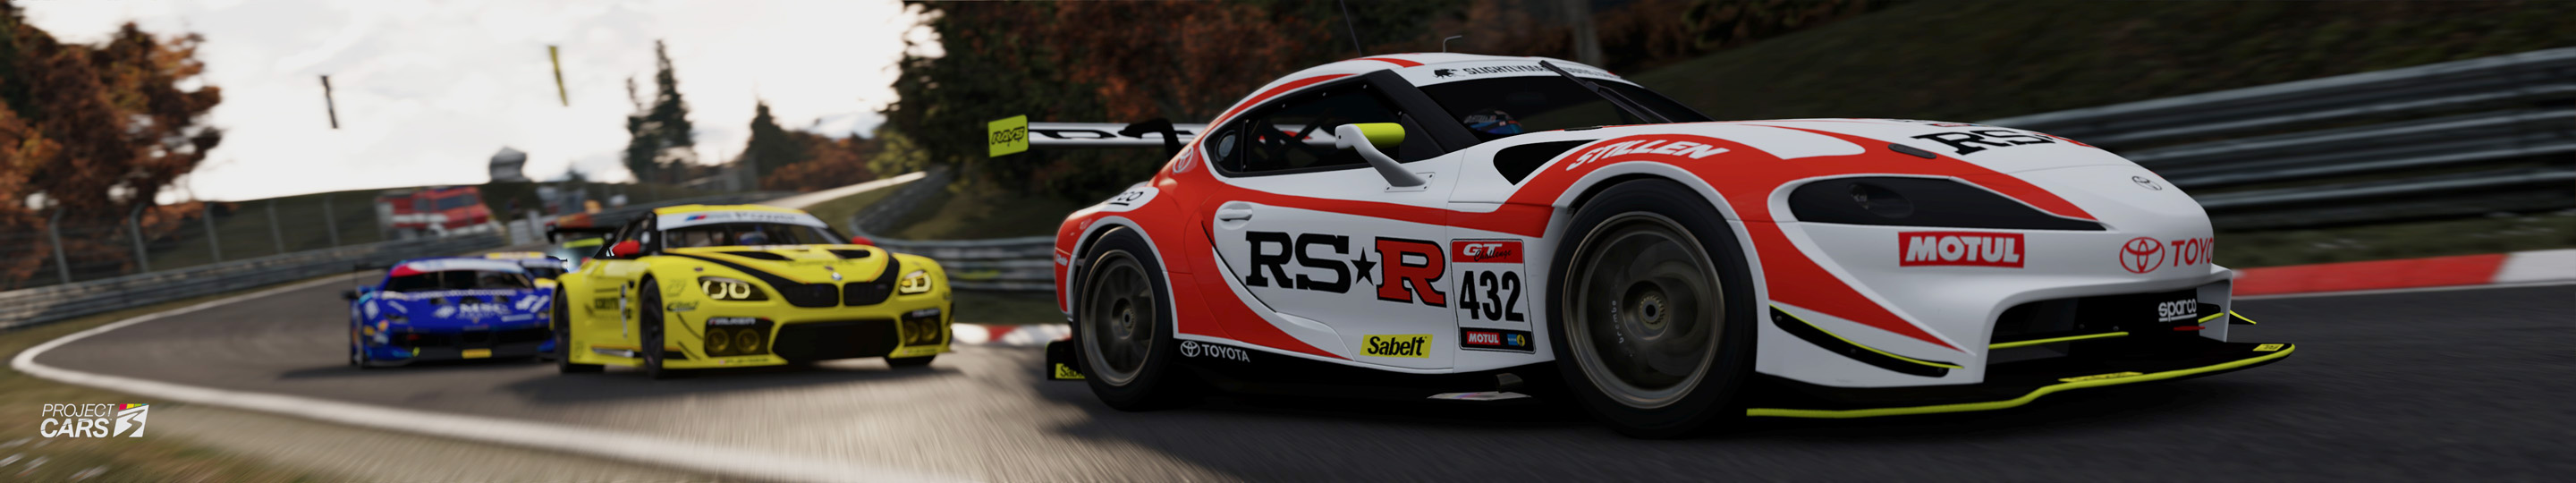 9 PROJECT CARS 3 GT3 at NORDSCHLEIFE copy.jpg